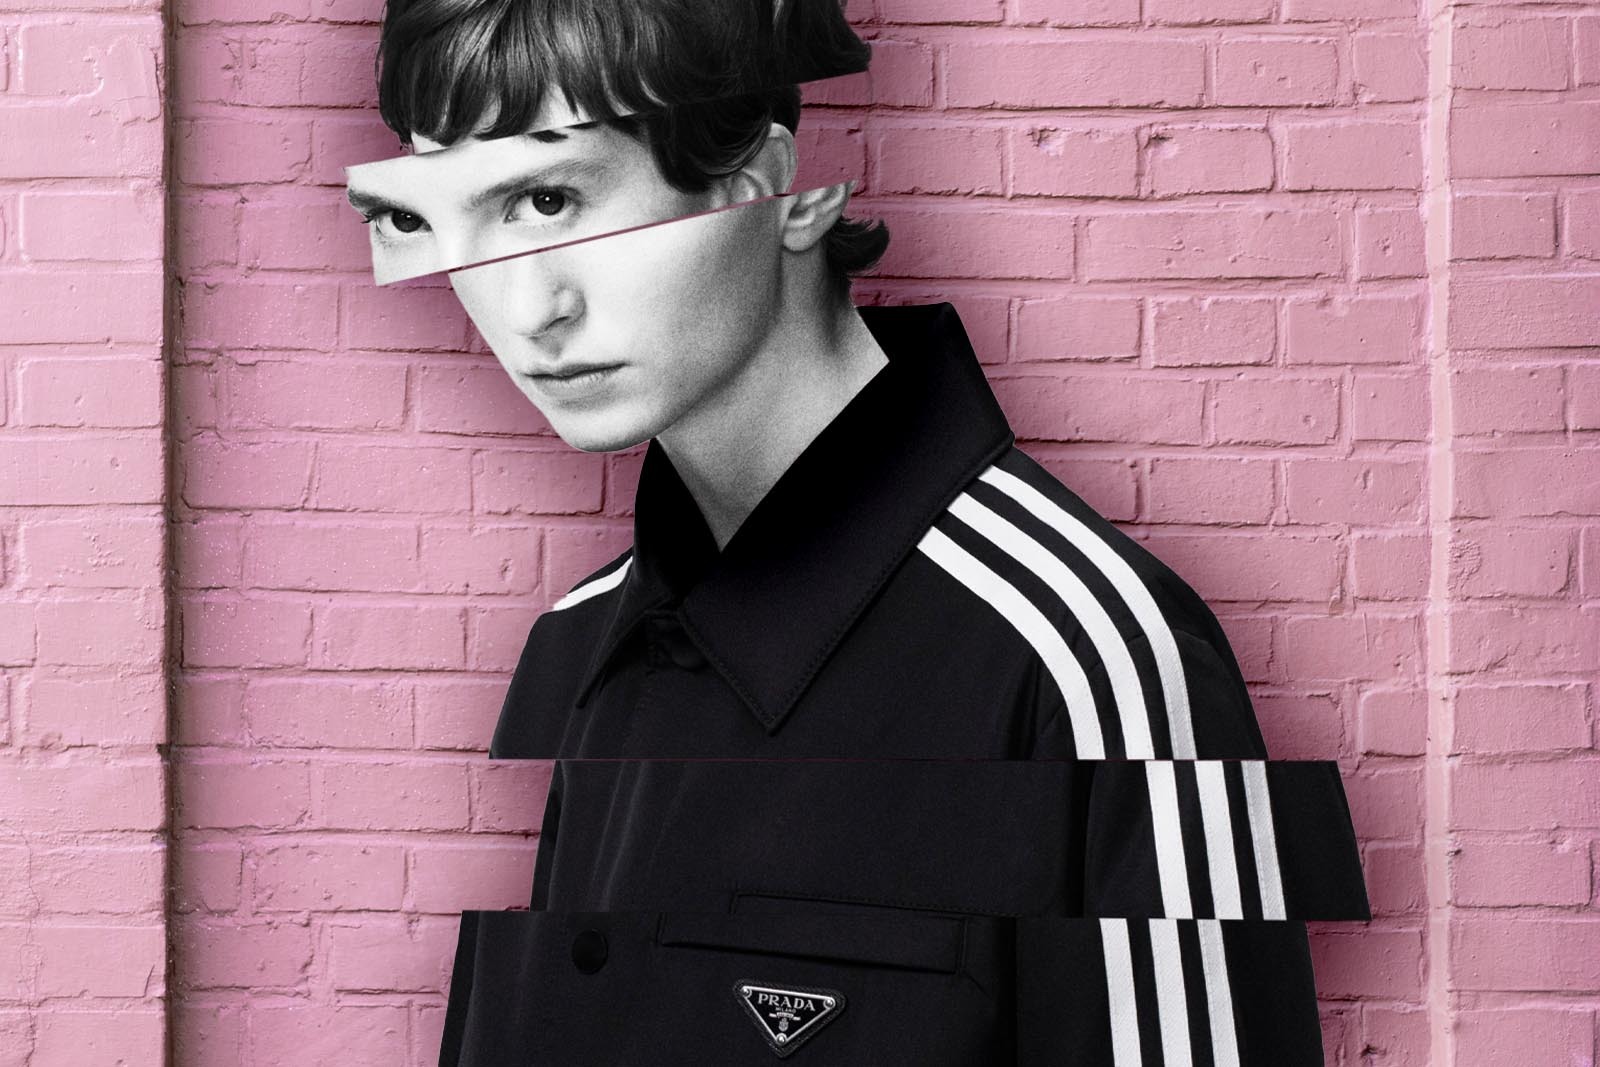 Adidas Originals and Prada Collaborate to Deliver Exclusive NFT Project  Into the Metaverse - DailyCoin